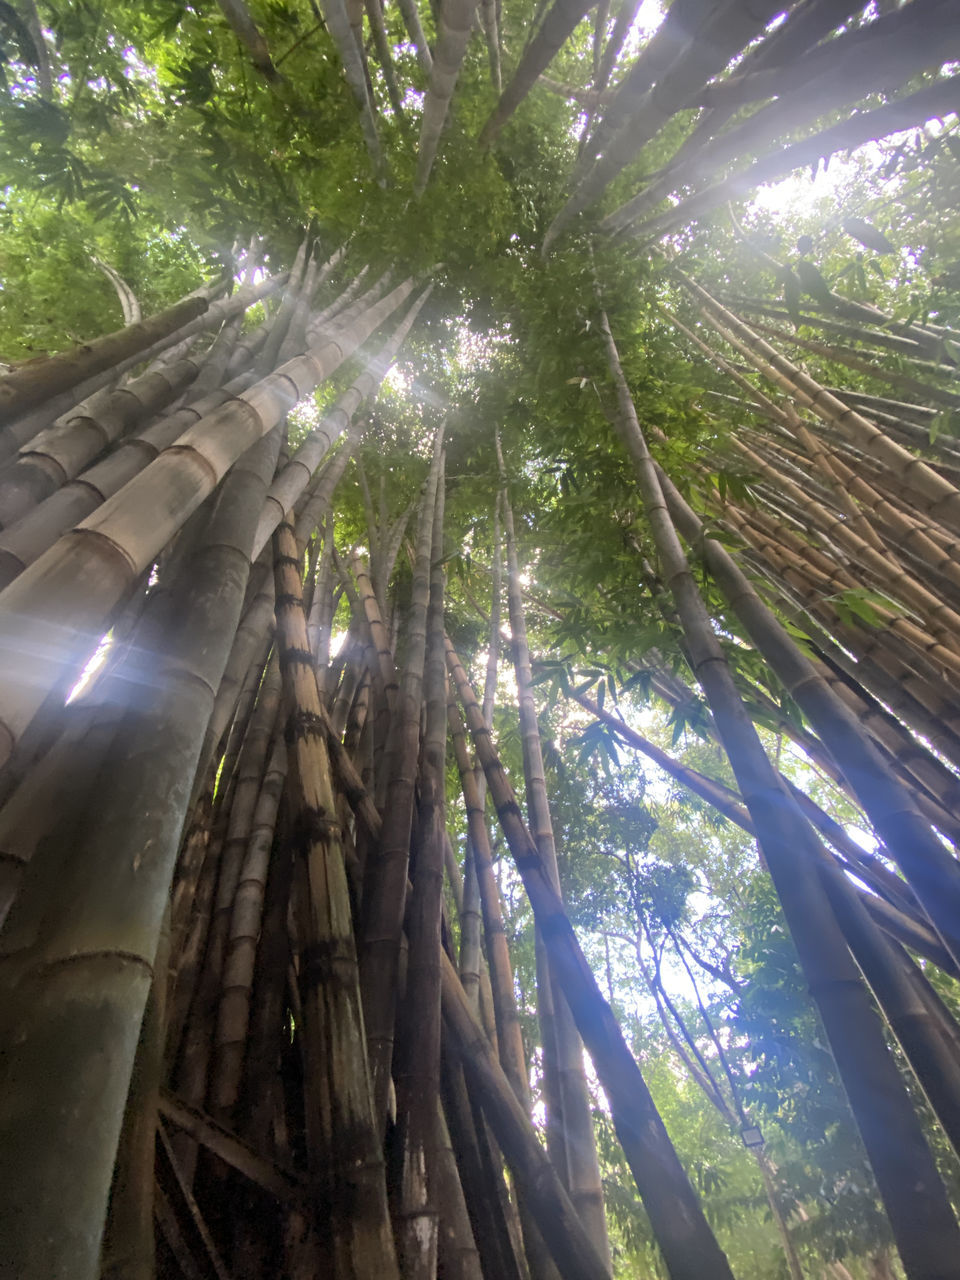 tree, plant, sunlight, low angle view, growth, nature, light, no people, forest, land, jungle, sunbeam, beauty in nature, outdoors, day, tropical climate, tree trunk, architecture, bamboo - plant, natural environment, trunk, green, leaf, tranquility, palm tree, lens flare